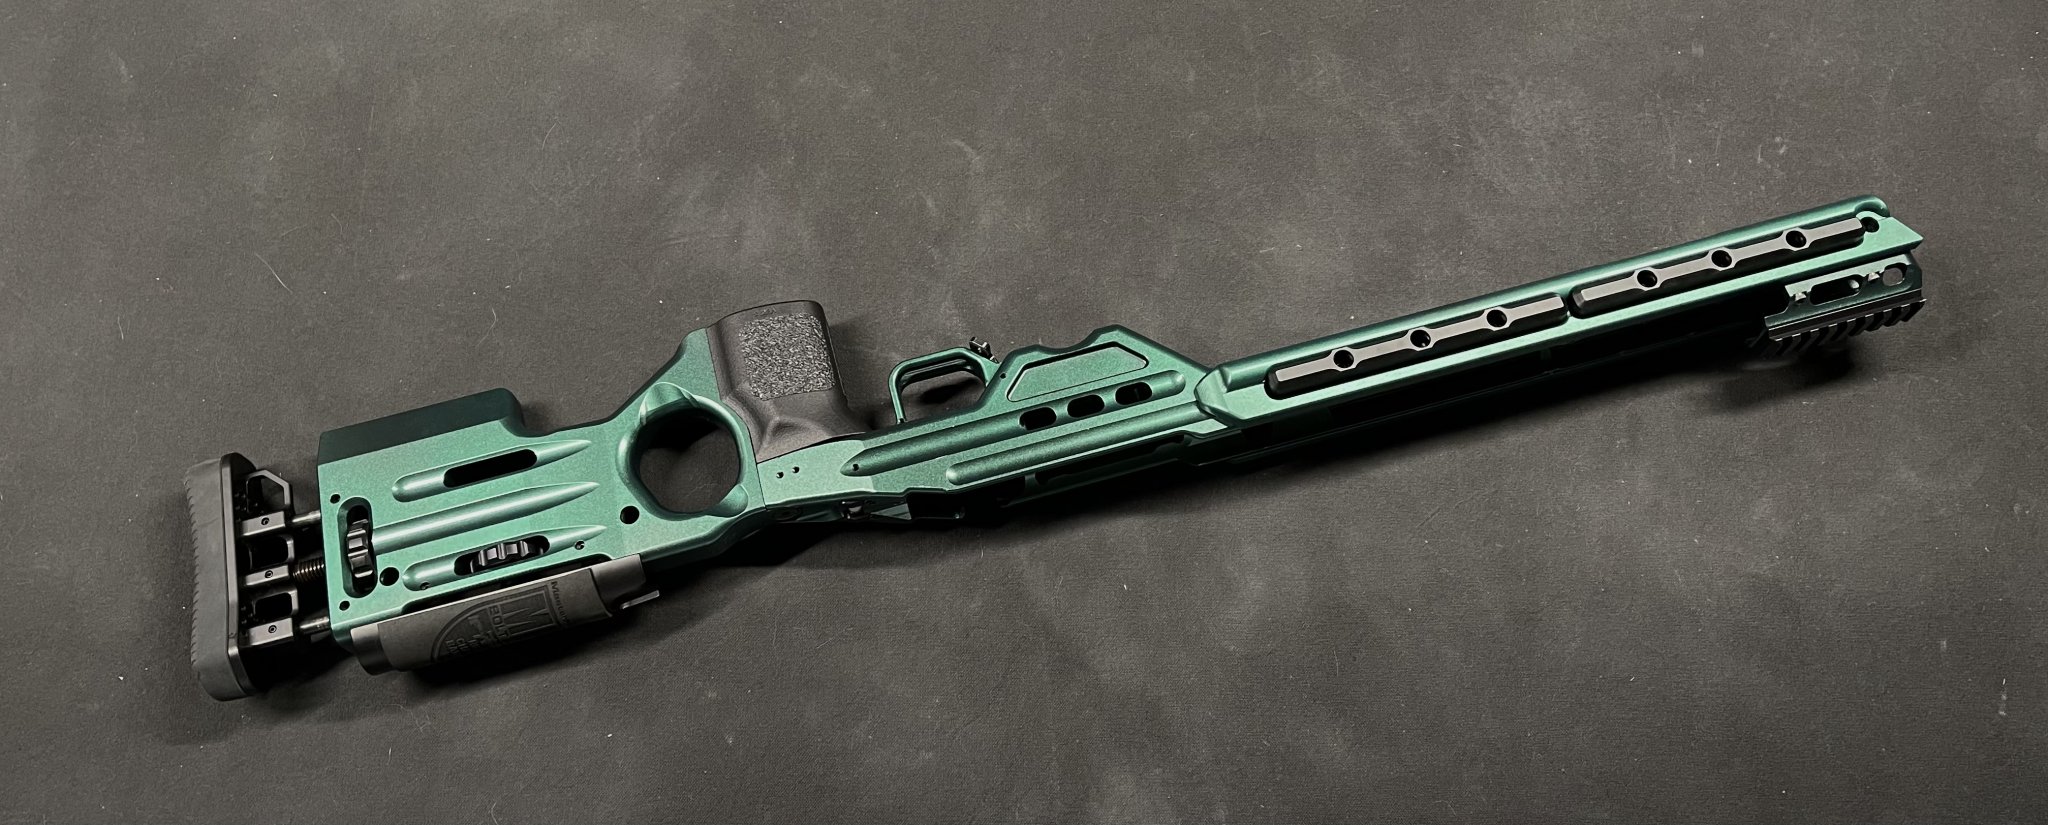 SOLD - WTS MPA Matrix with comp side rails, weights | Sniper's Hide Forum